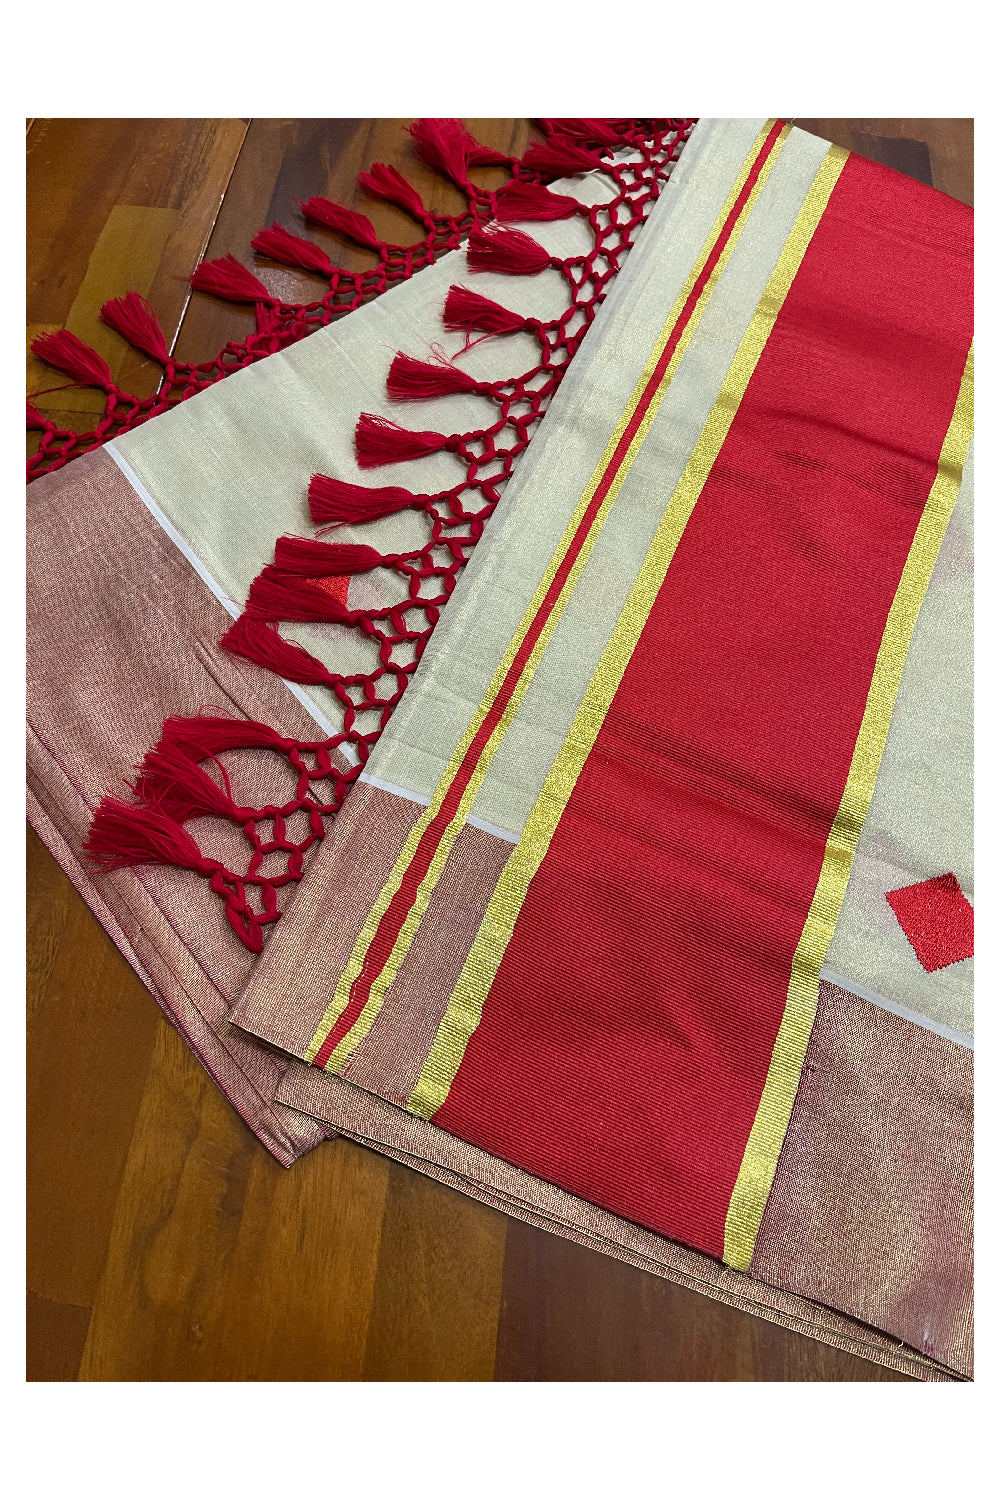 Kerala Tissue Kasavu Saree with Red Gold Woven Butta Designs and Tassels Works